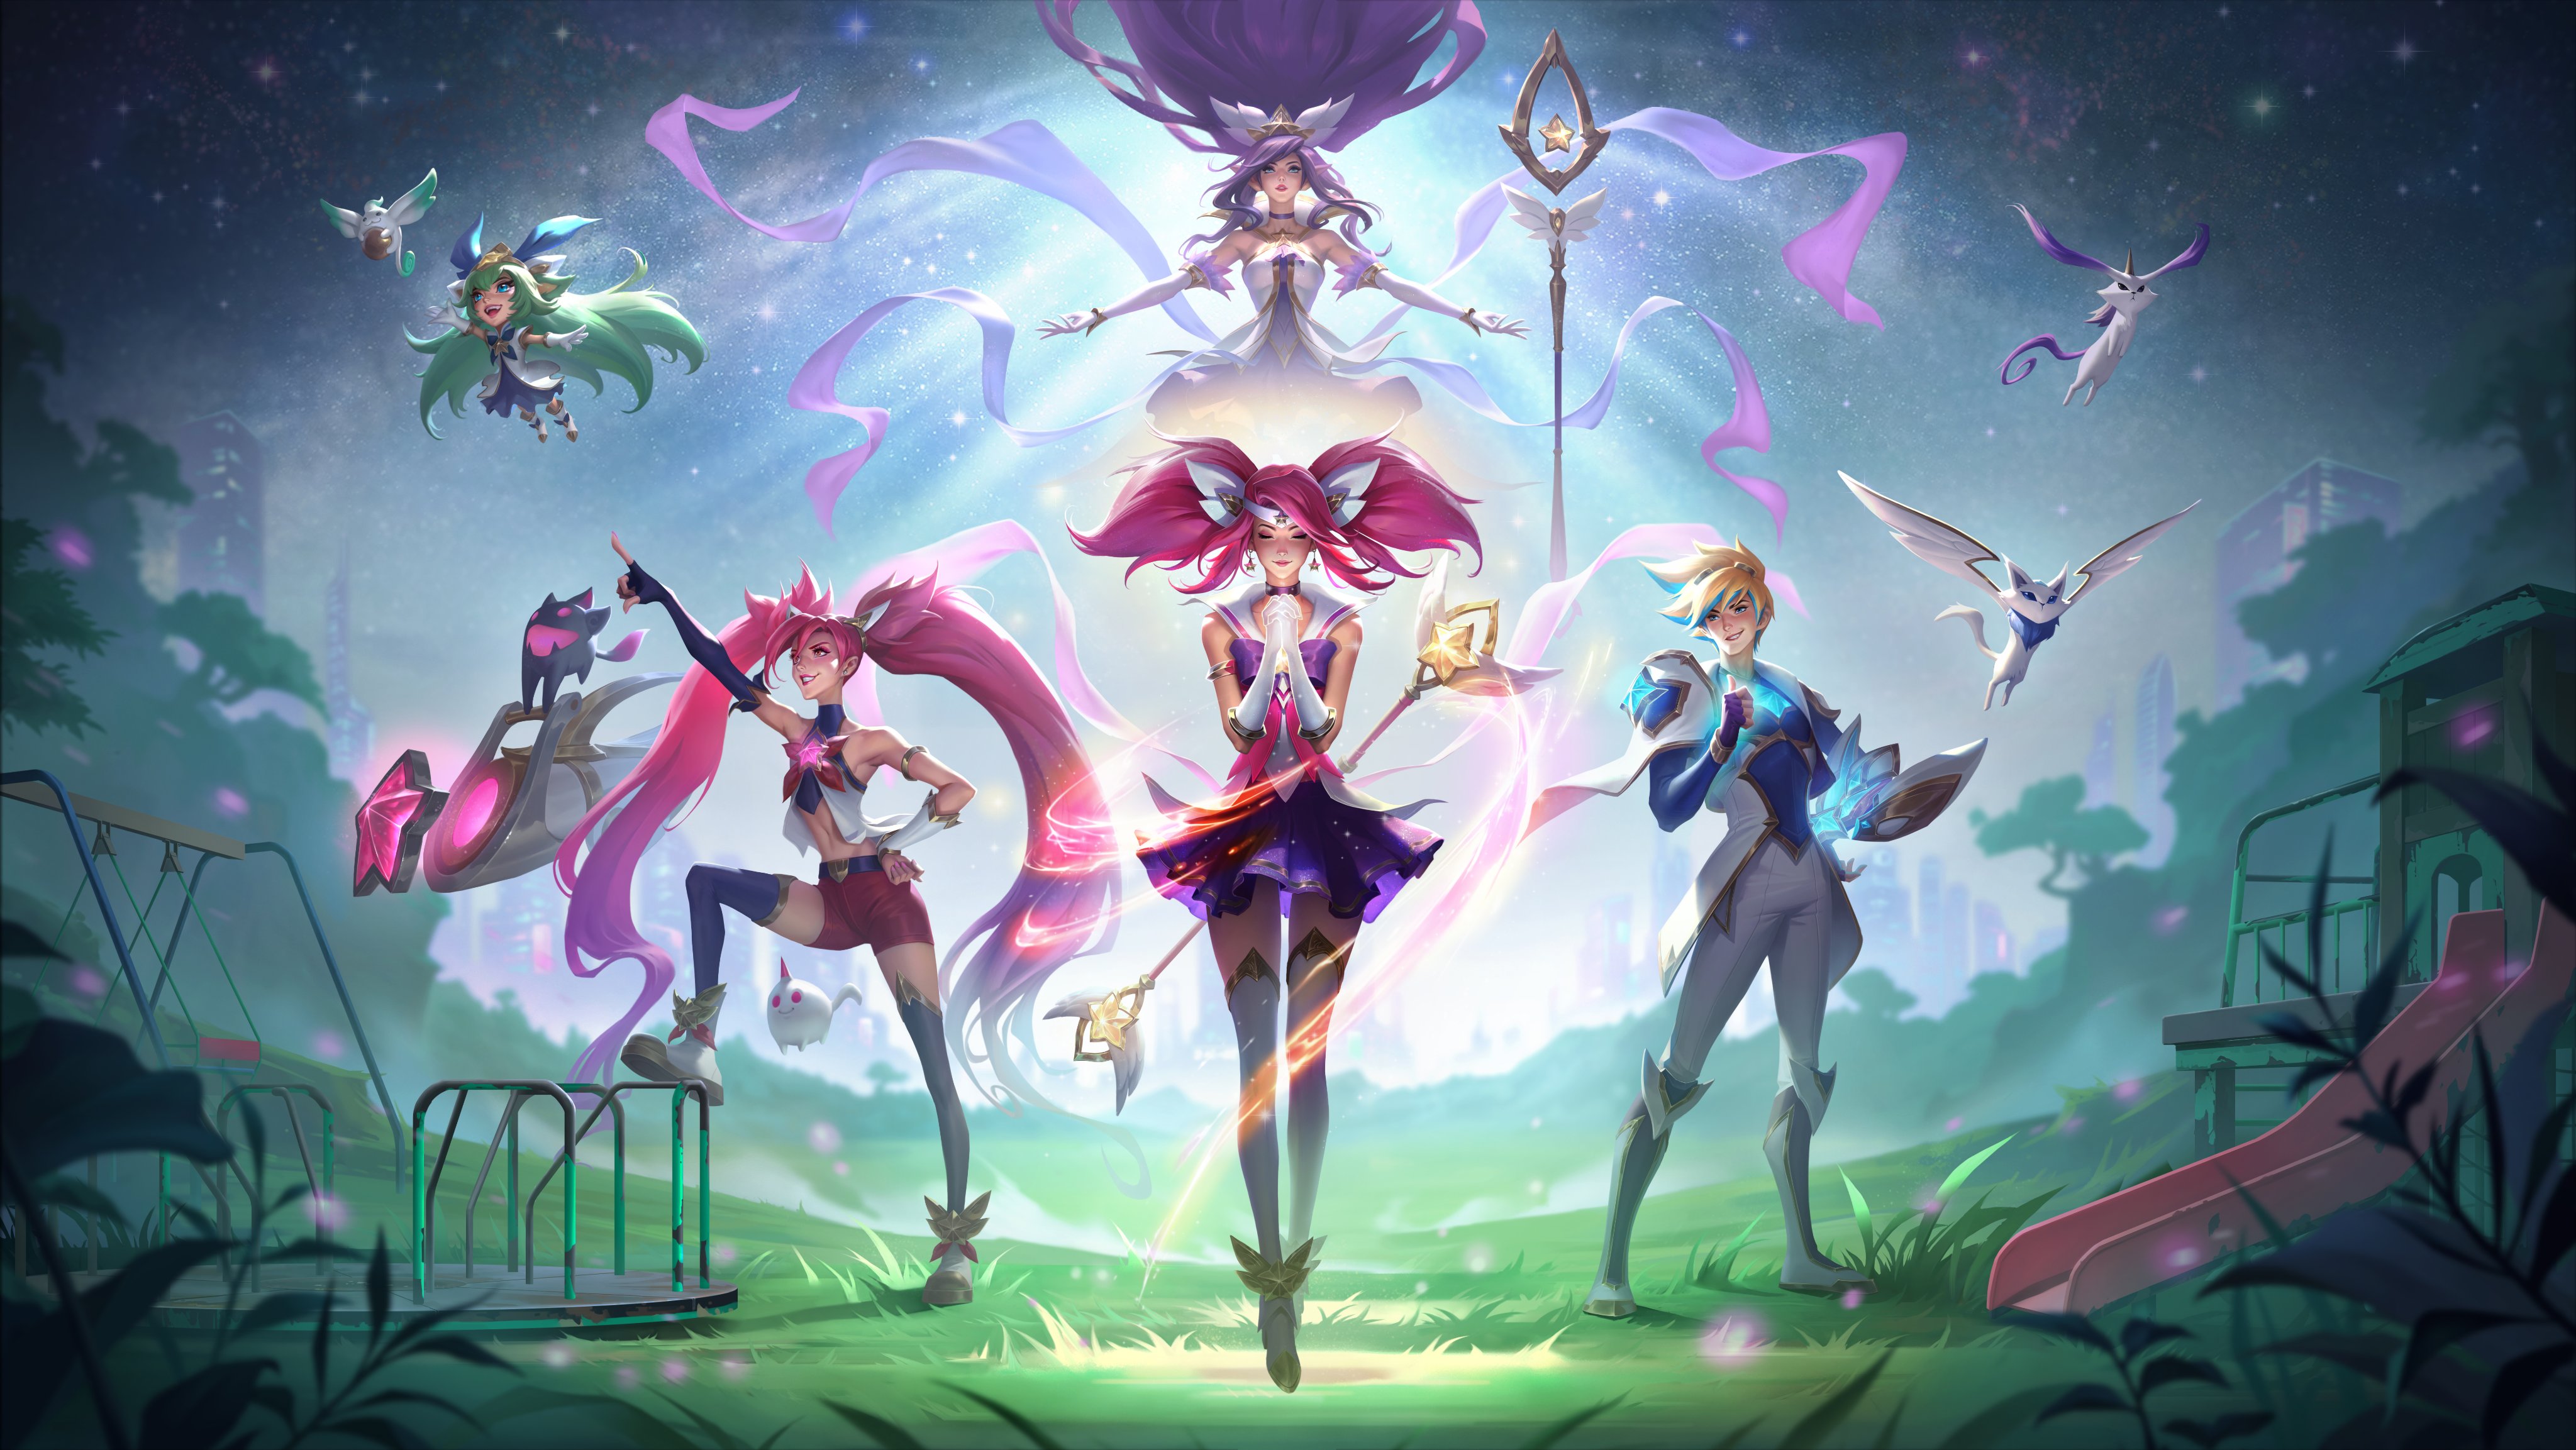 Lux Wallpapers